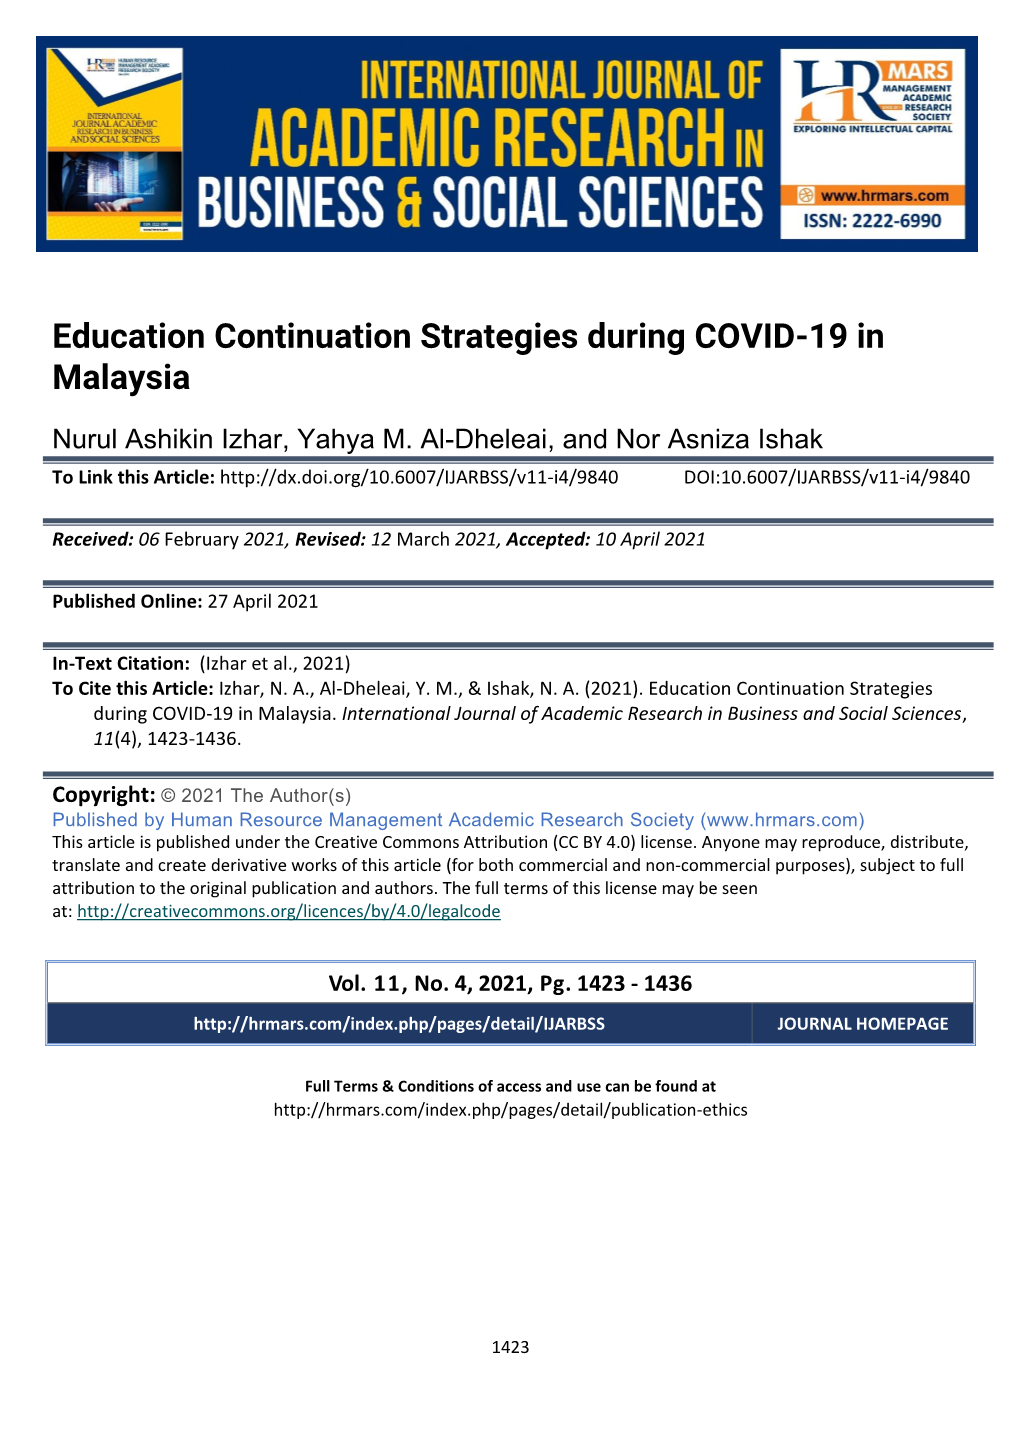 Education Continuation Strategies During COVID-19 in Malaysia